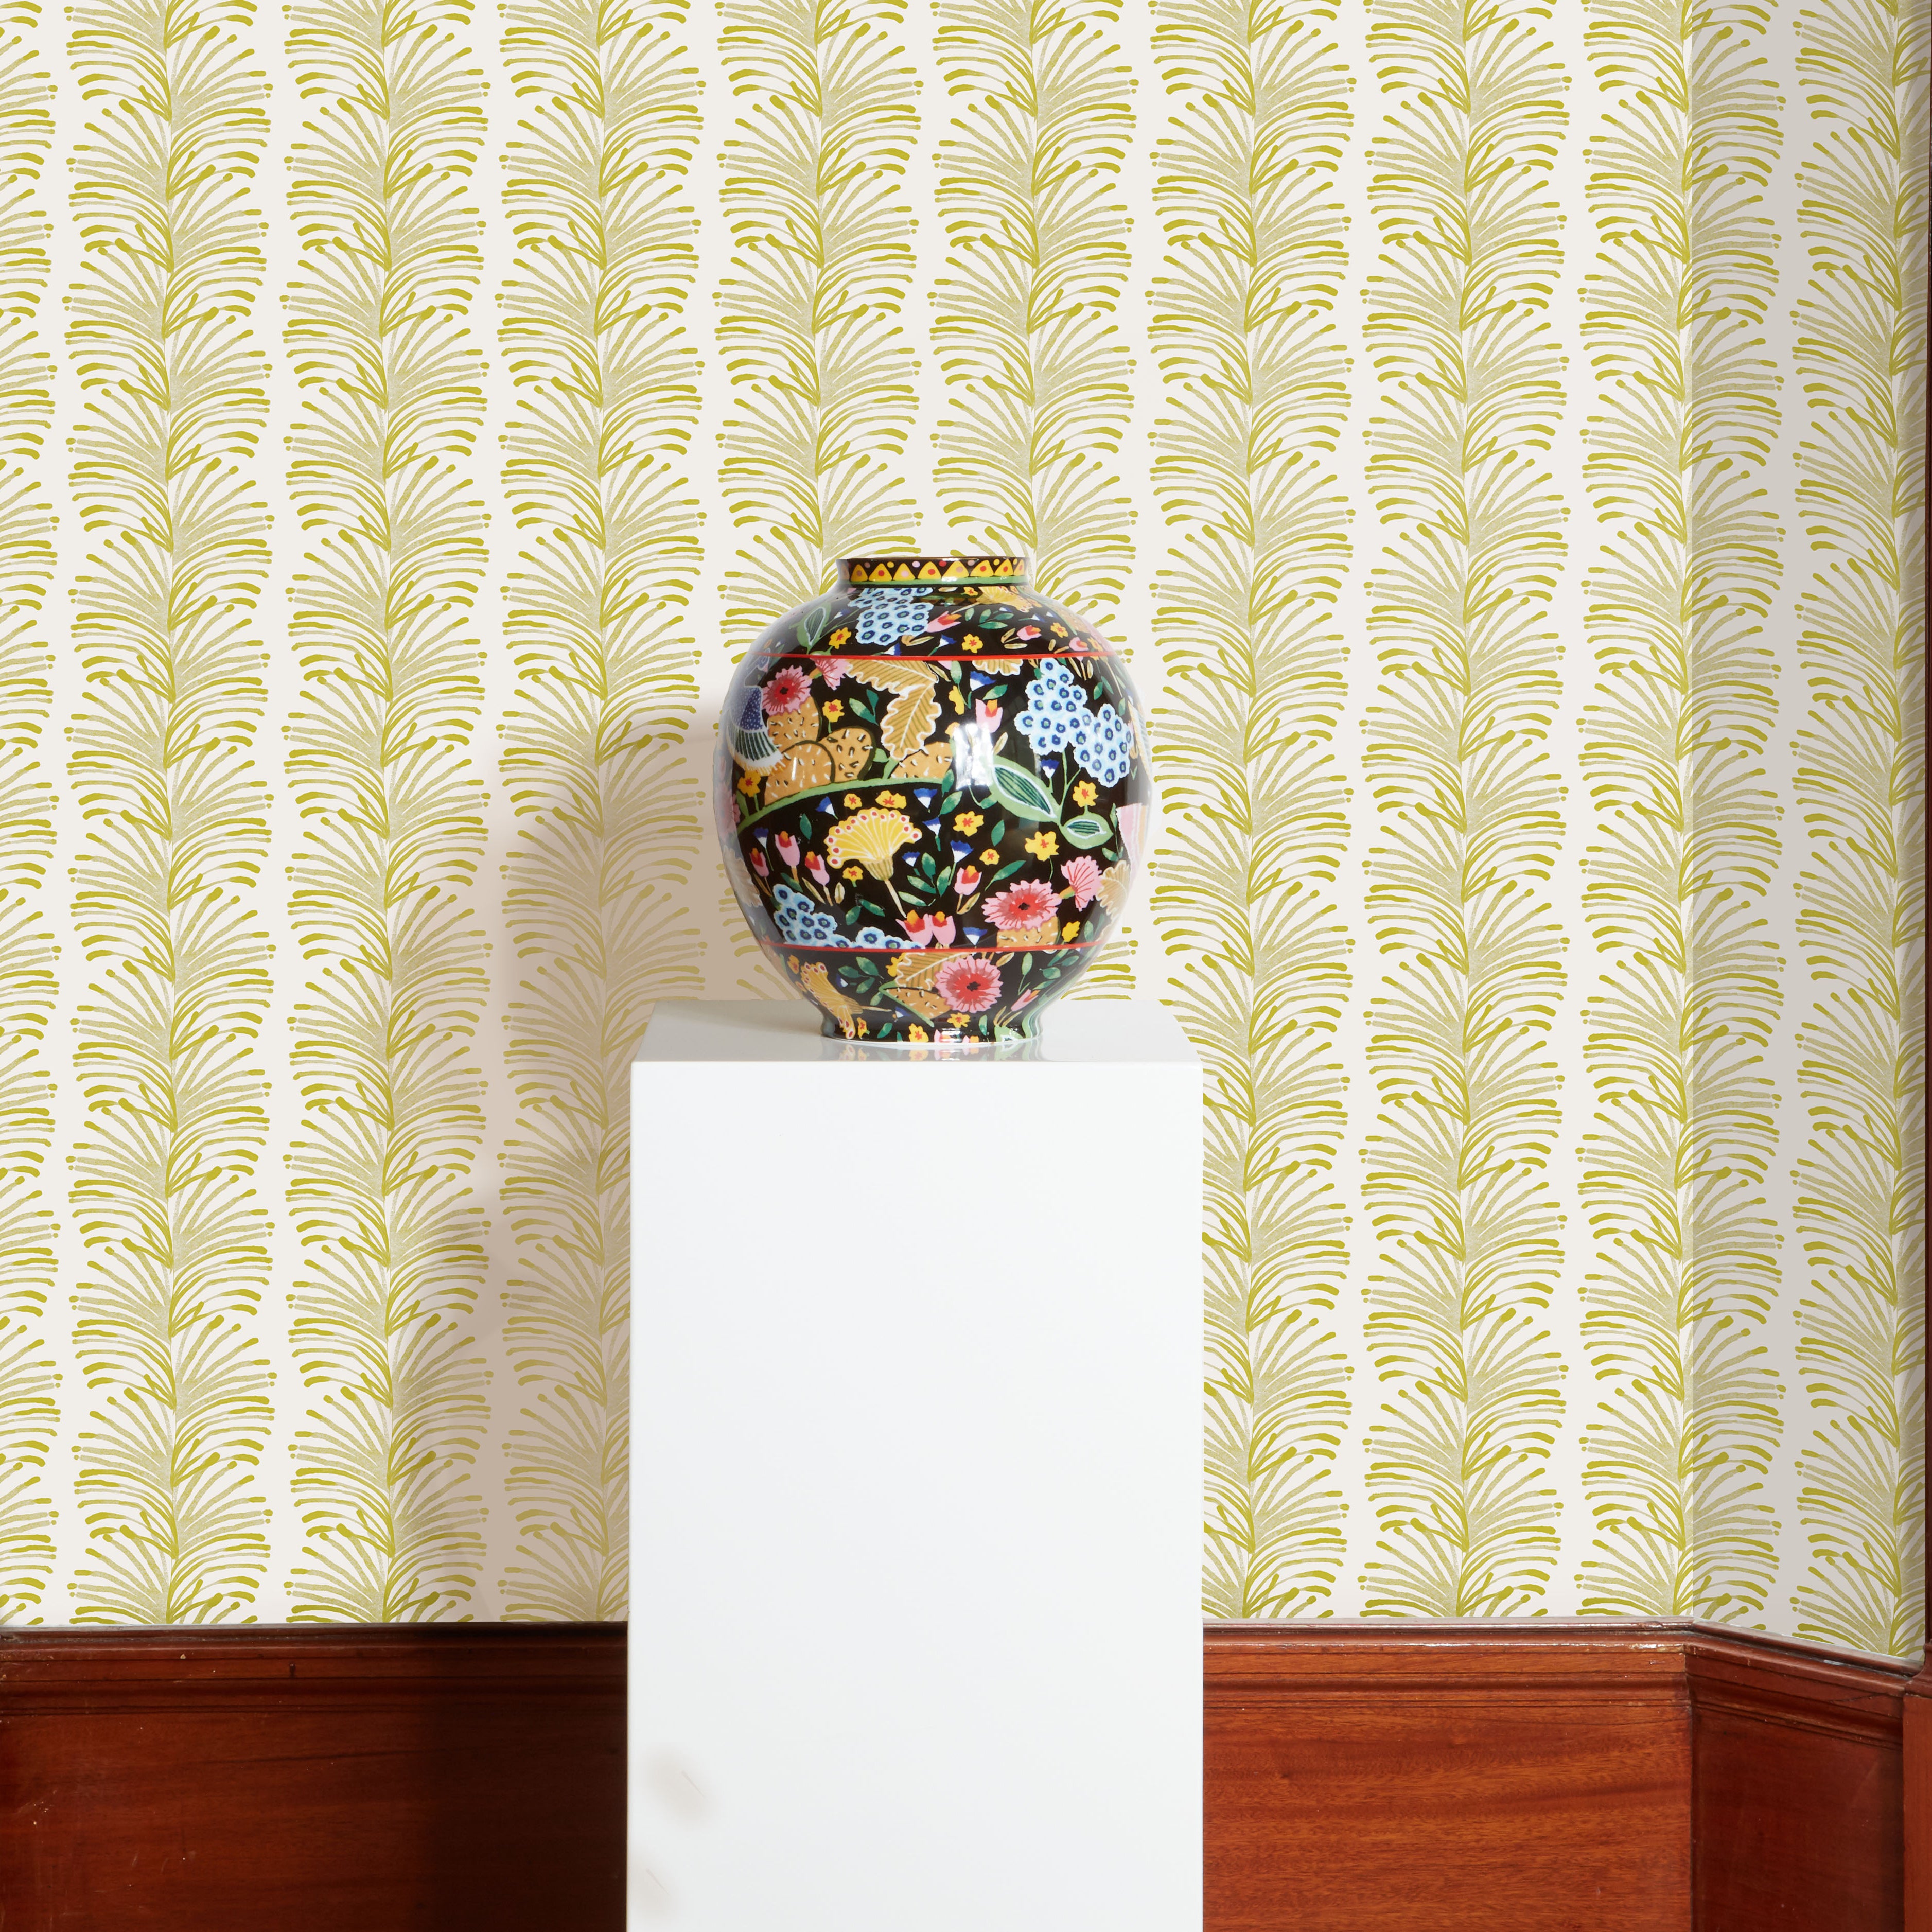 34 Chartreuse wallpaper ideas  wallpaper chartreuse wall coverings